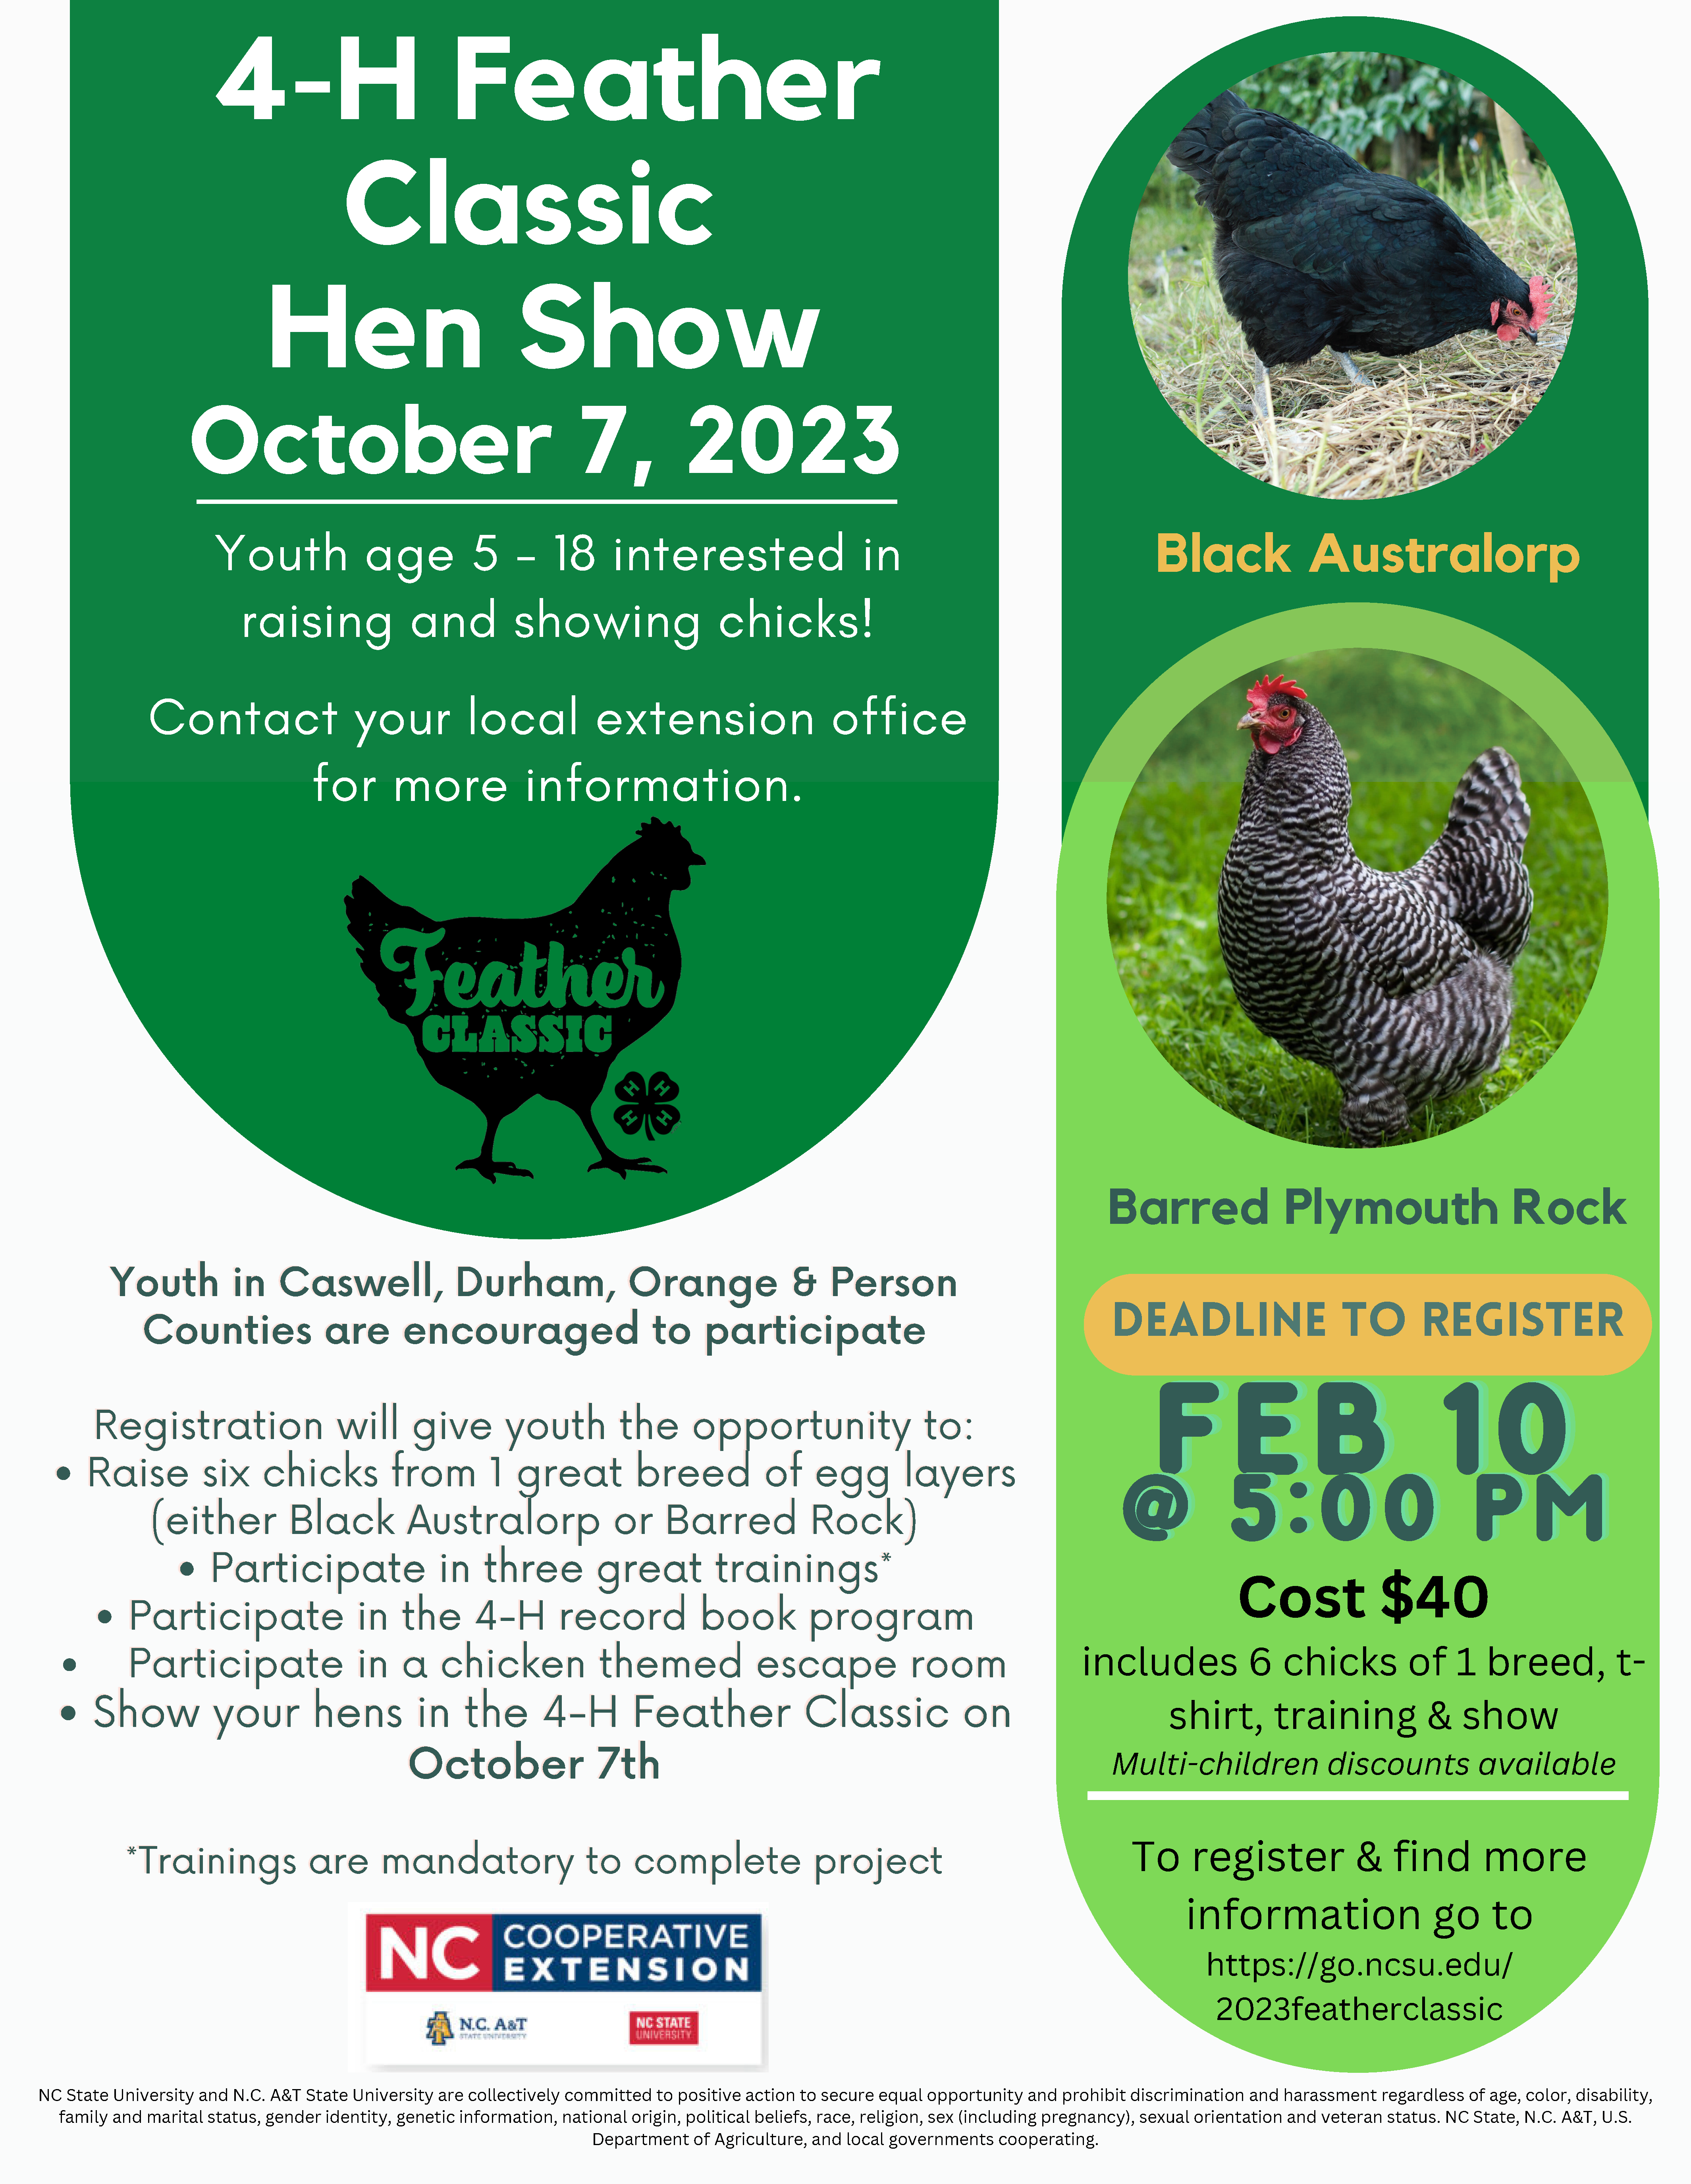 4-H Feather Classic Hen Show.